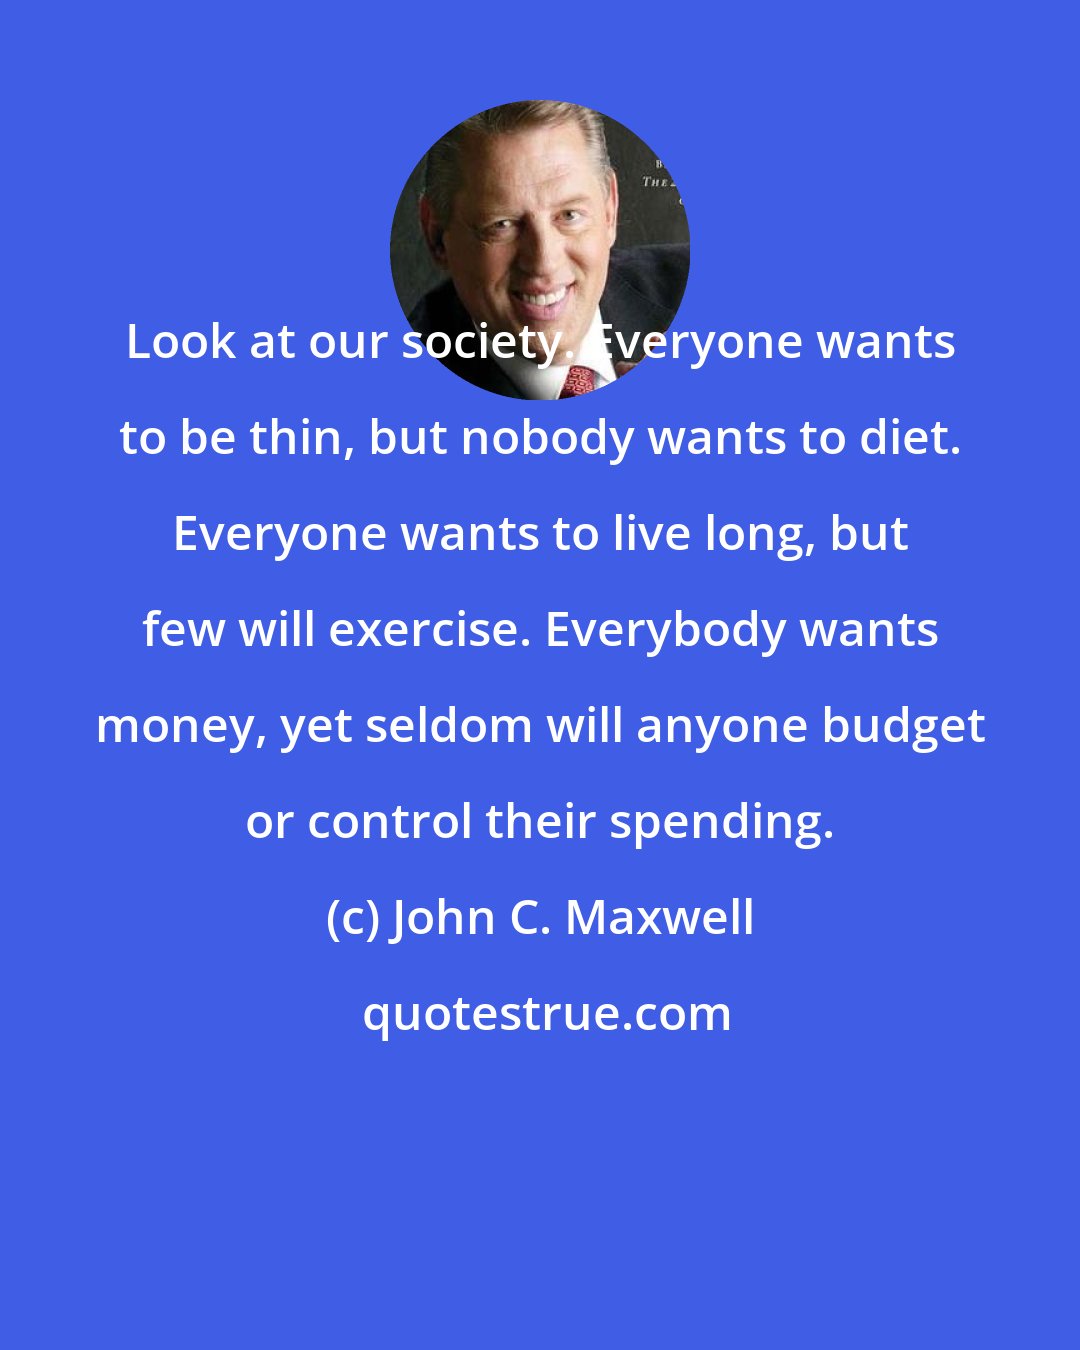 John C. Maxwell: Look at our society. Everyone wants to be thin, but nobody wants to diet. Everyone wants to live long, but few will exercise. Everybody wants money, yet seldom will anyone budget or control their spending.